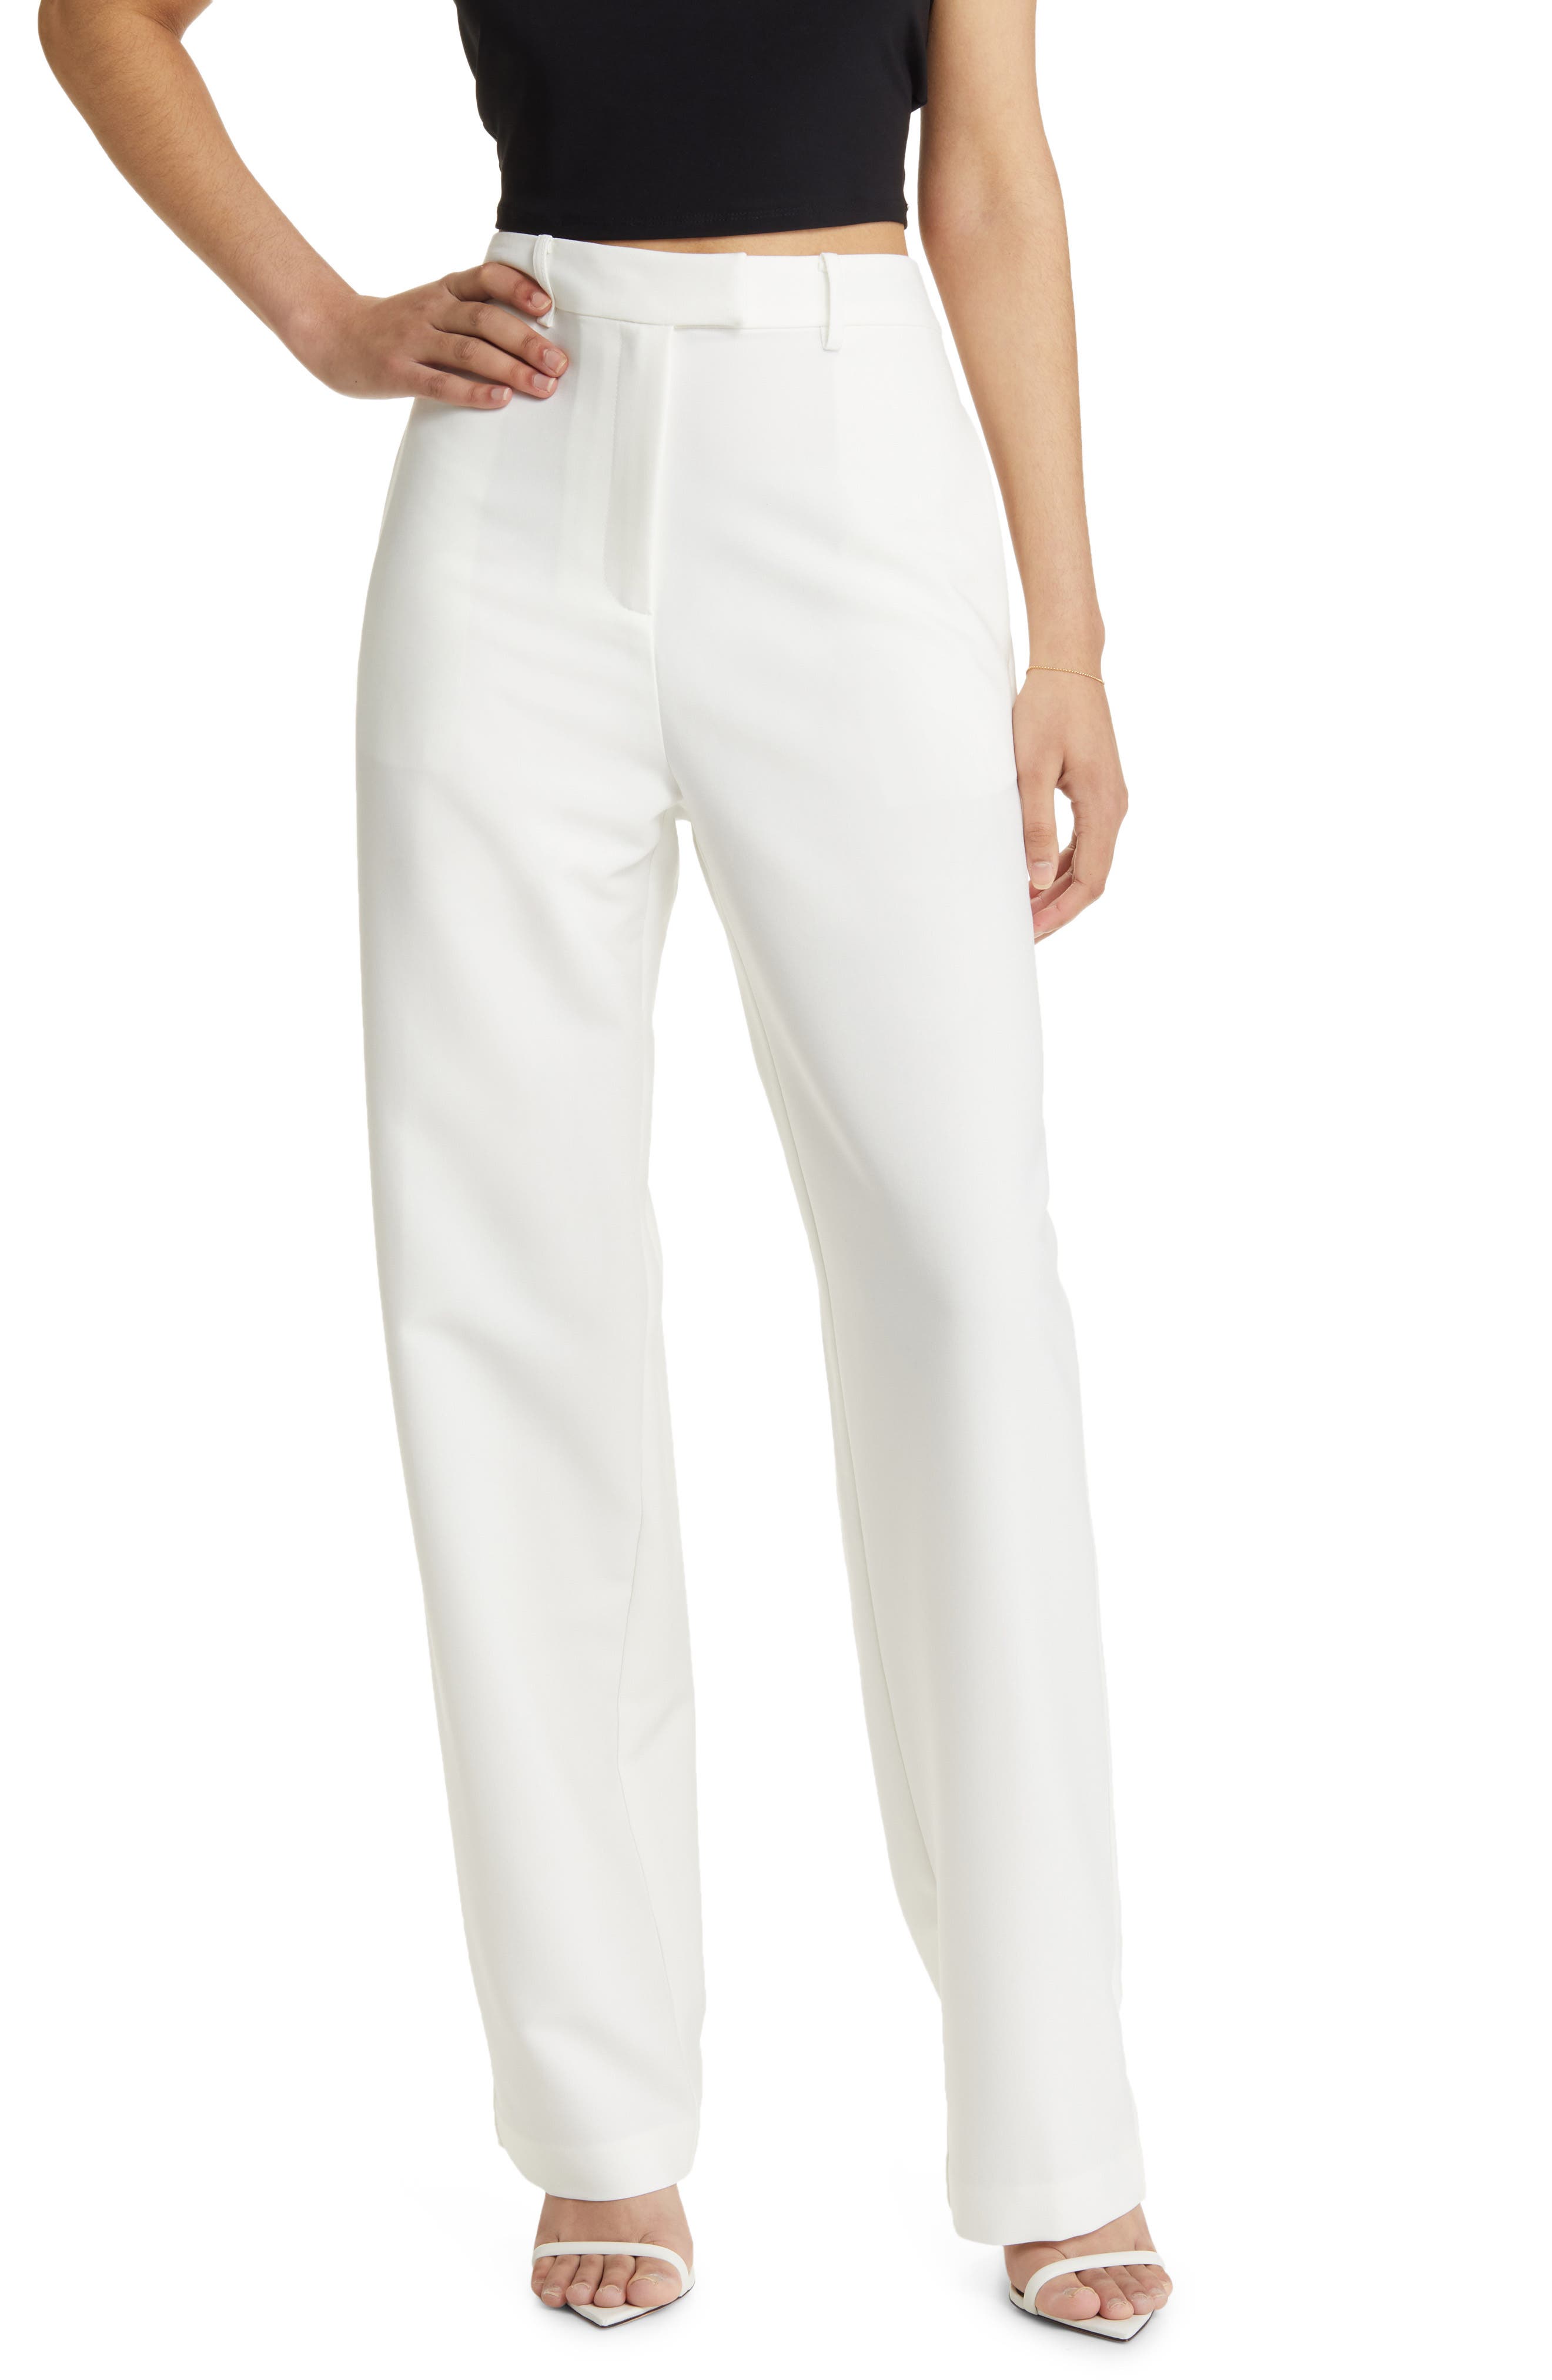 Pulsar Straight Cotton Stitched Trousers Sleek White Trouser-saigonsouth.com.vn